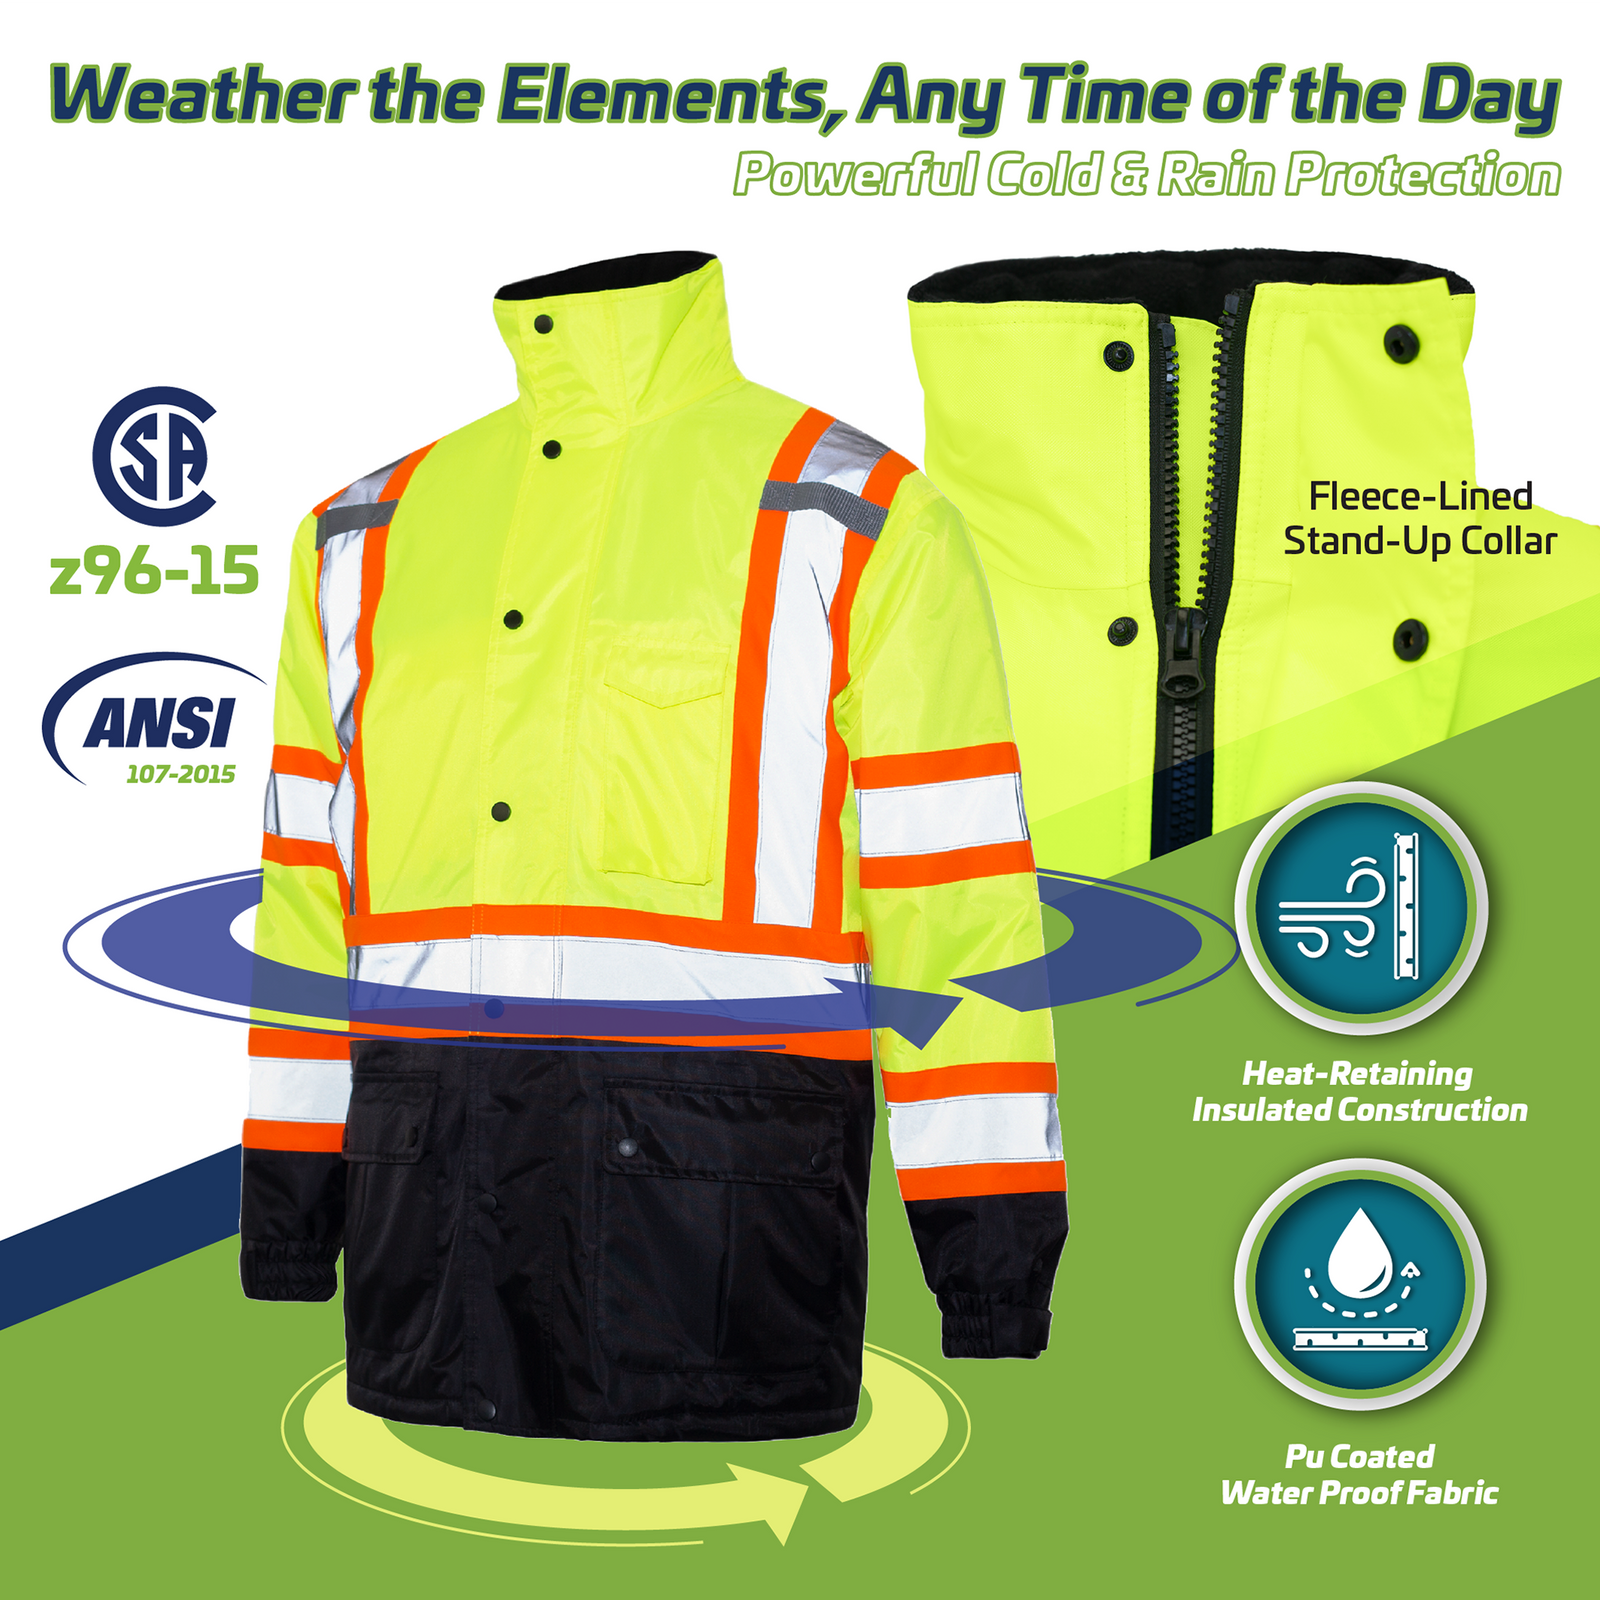 ANSI and CSA compliant Hi vis safety jacket color lime. Text reads: fleece lined stand collar, for powerful cold and rain protection, heat retaining insulated construction and PU coated